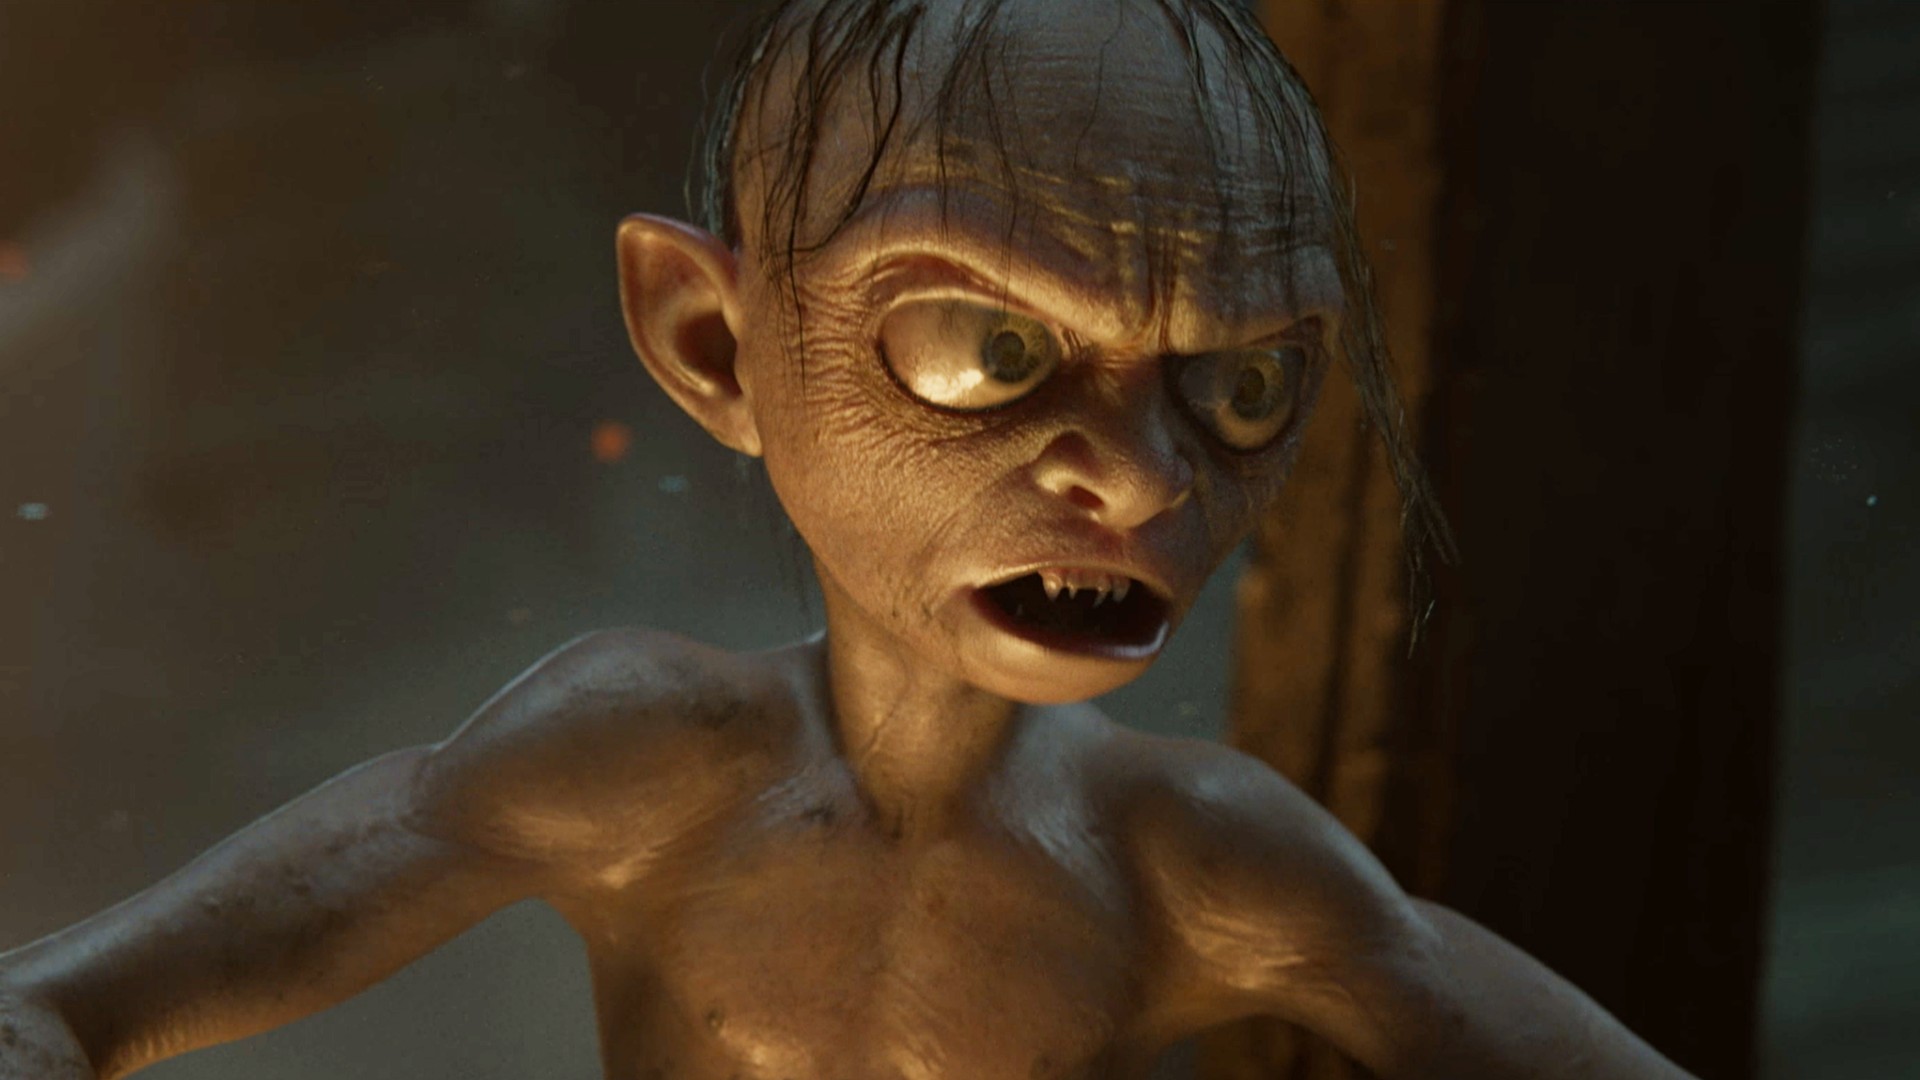 The Lord of the Rings: Gollum offers an authentic take on